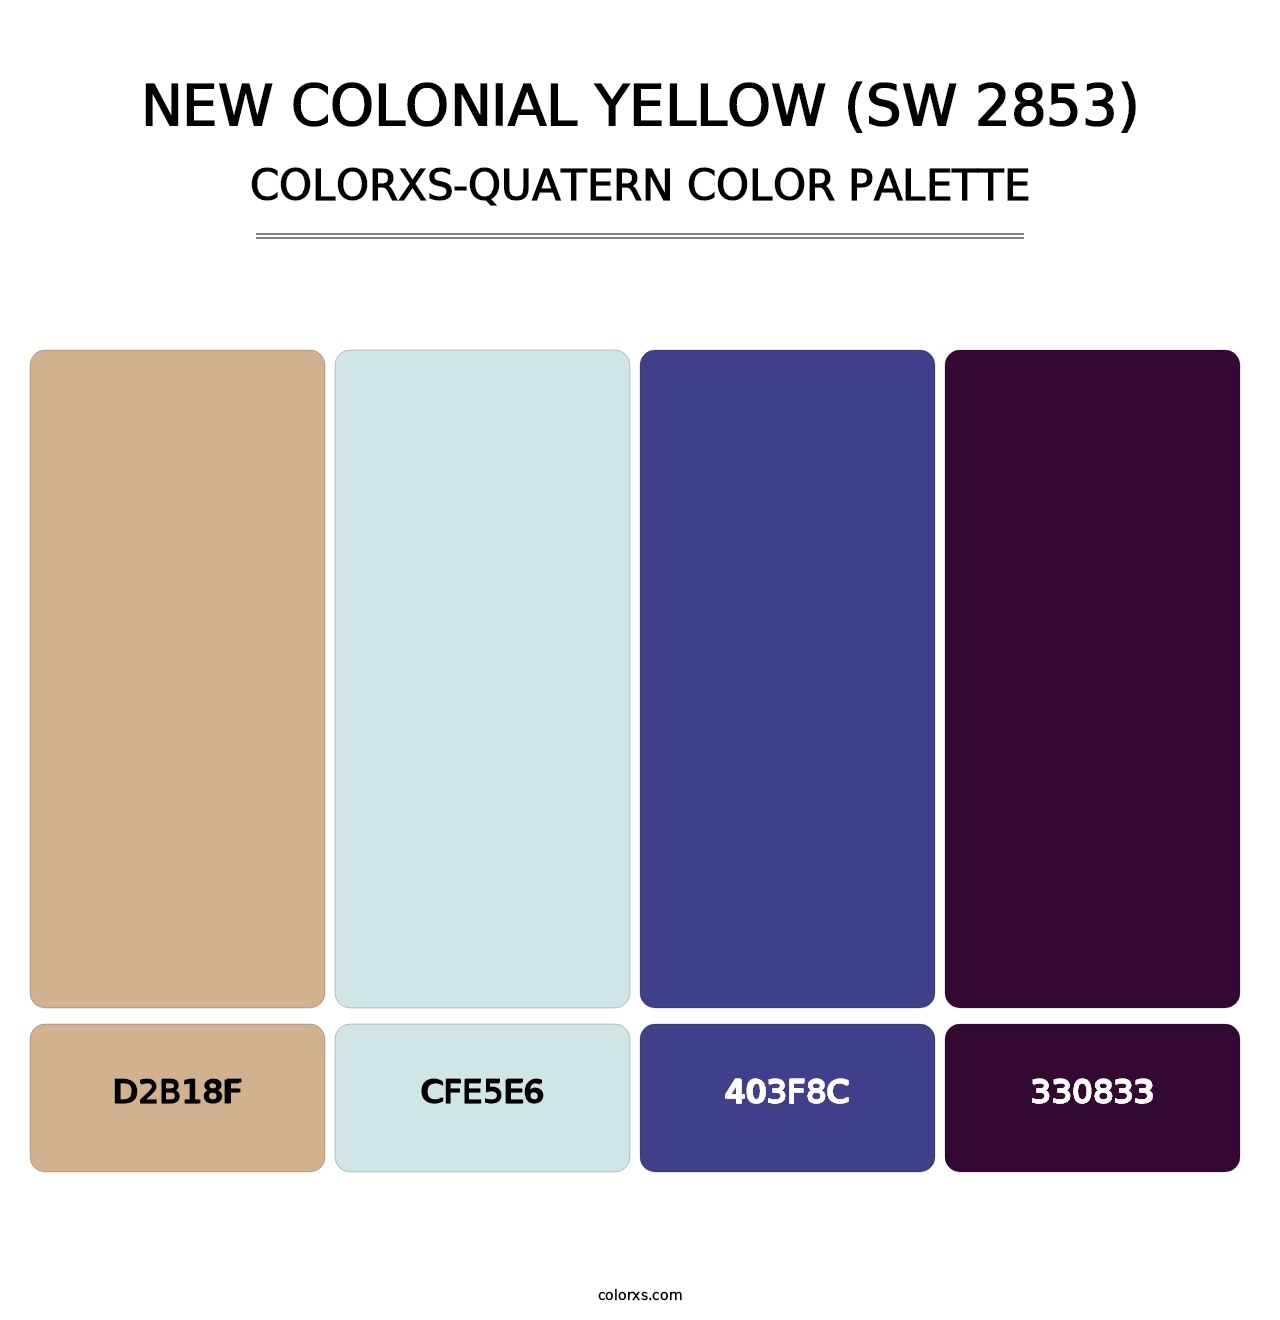 New Colonial Yellow (SW 2853) - Colorxs Quatern Palette